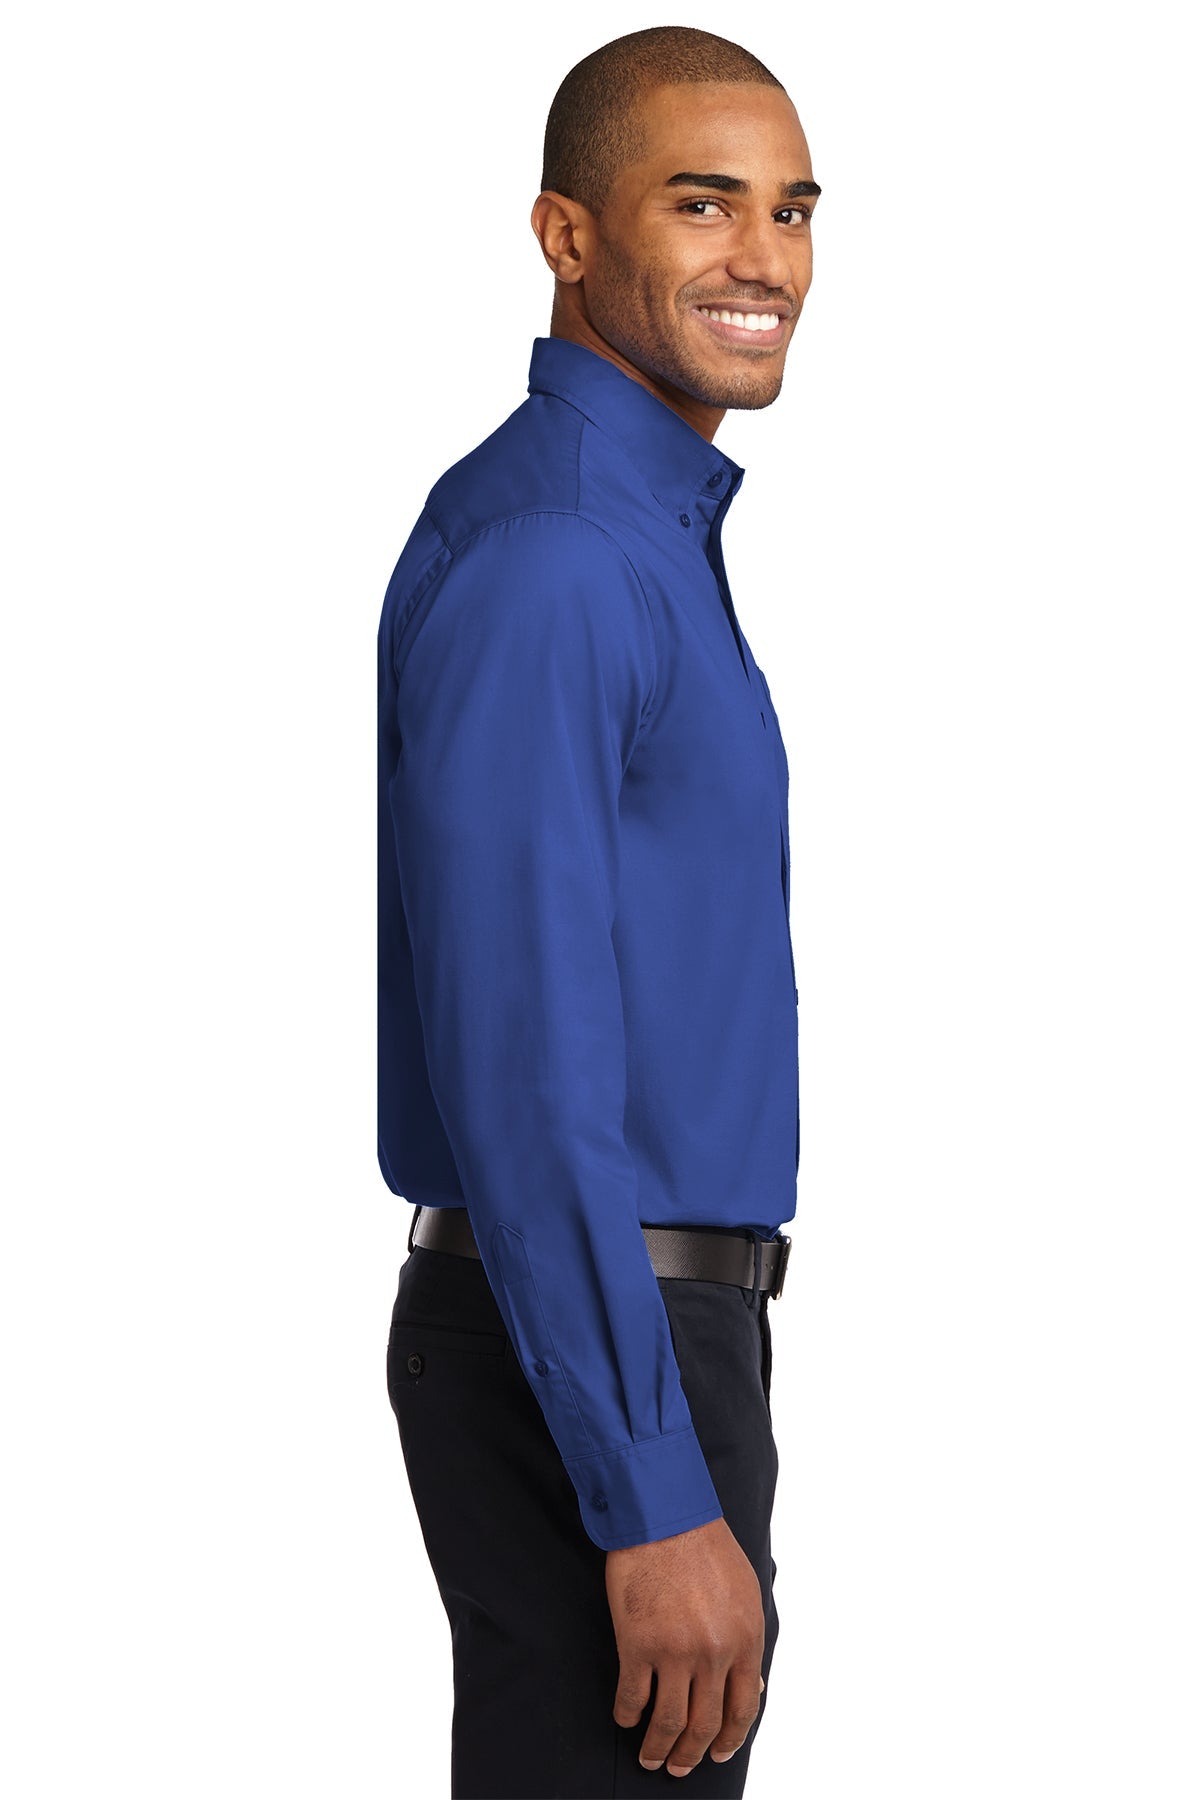 port authority_s608 _royal/ classic navy_company_logo_button downs